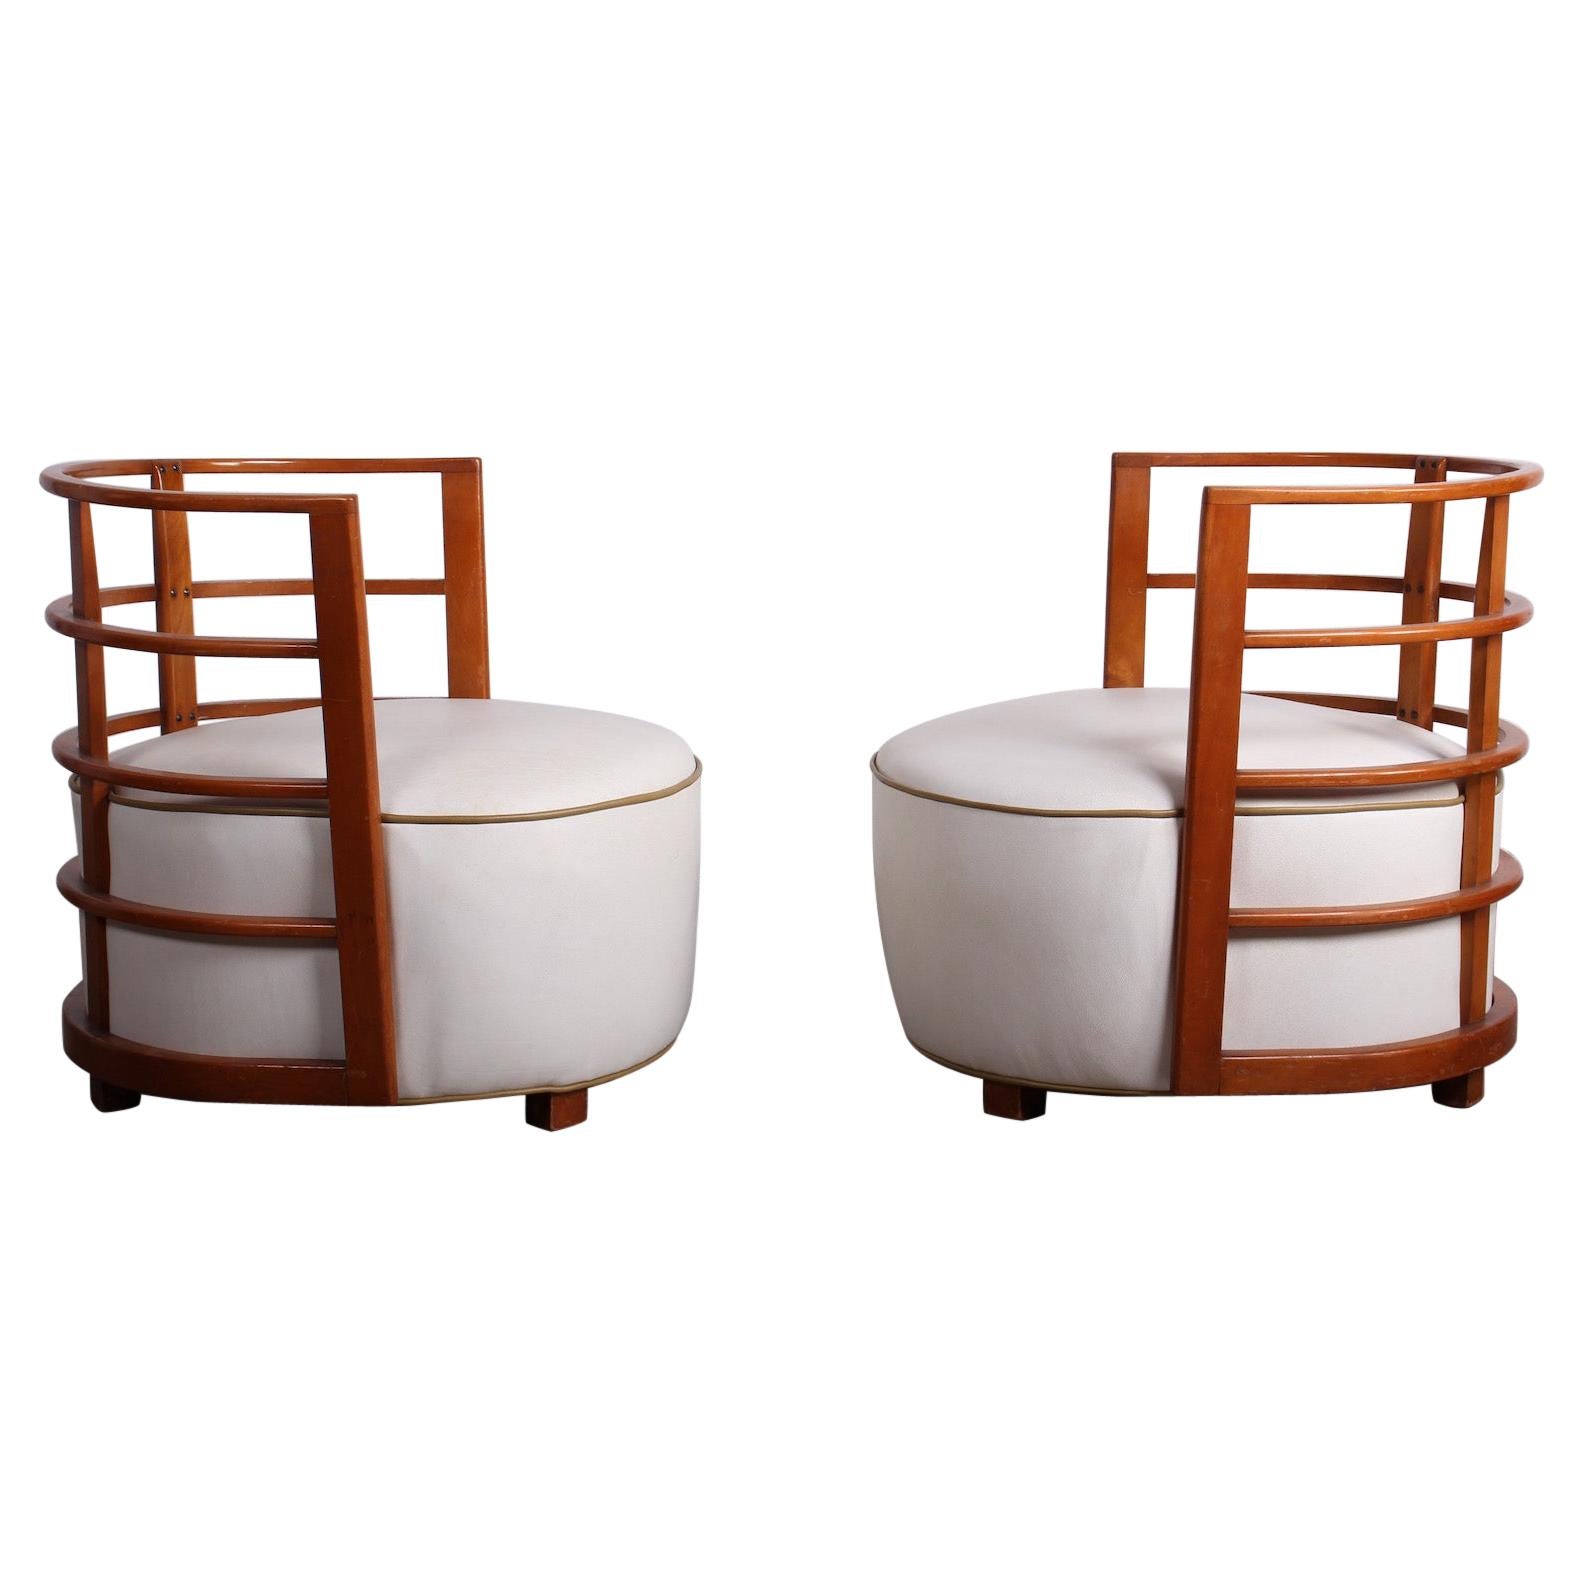 Rare Pair of Gilbert Rohde Chairs for Herman Miller, 1934